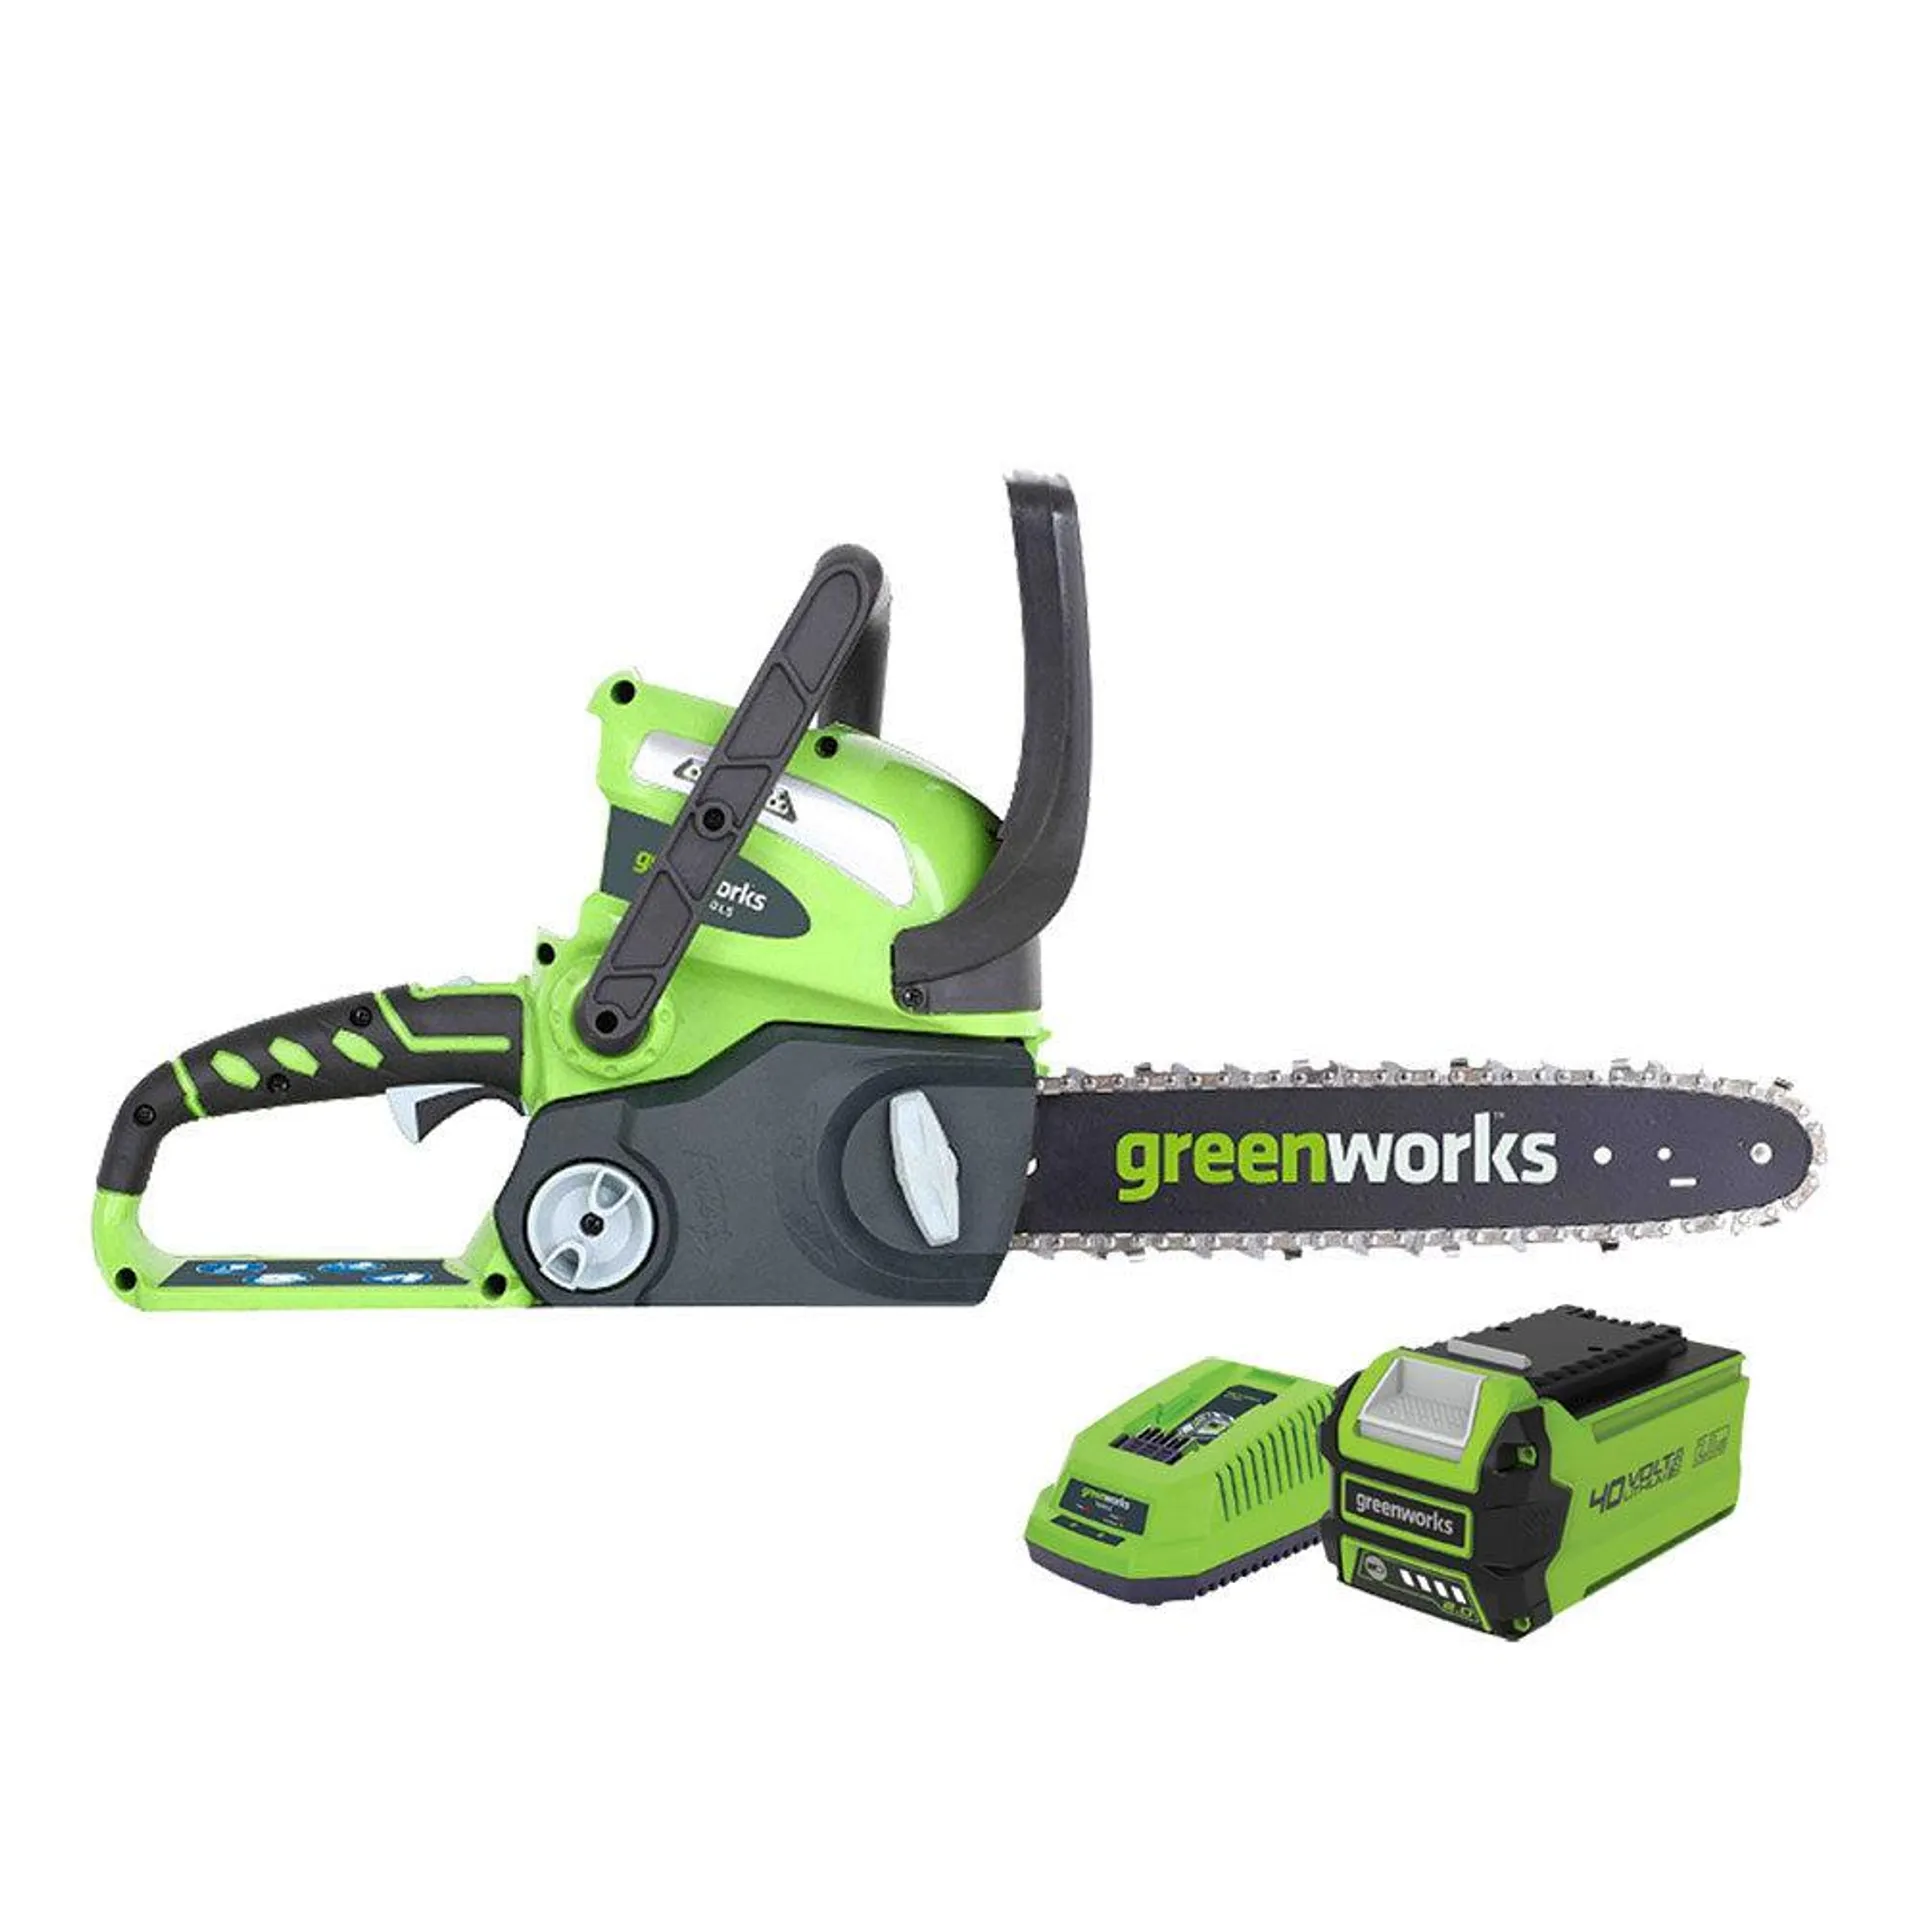 Greenworks 12" Chainsaw G-Max 40V with 2.0Ah Li-Ion Battery